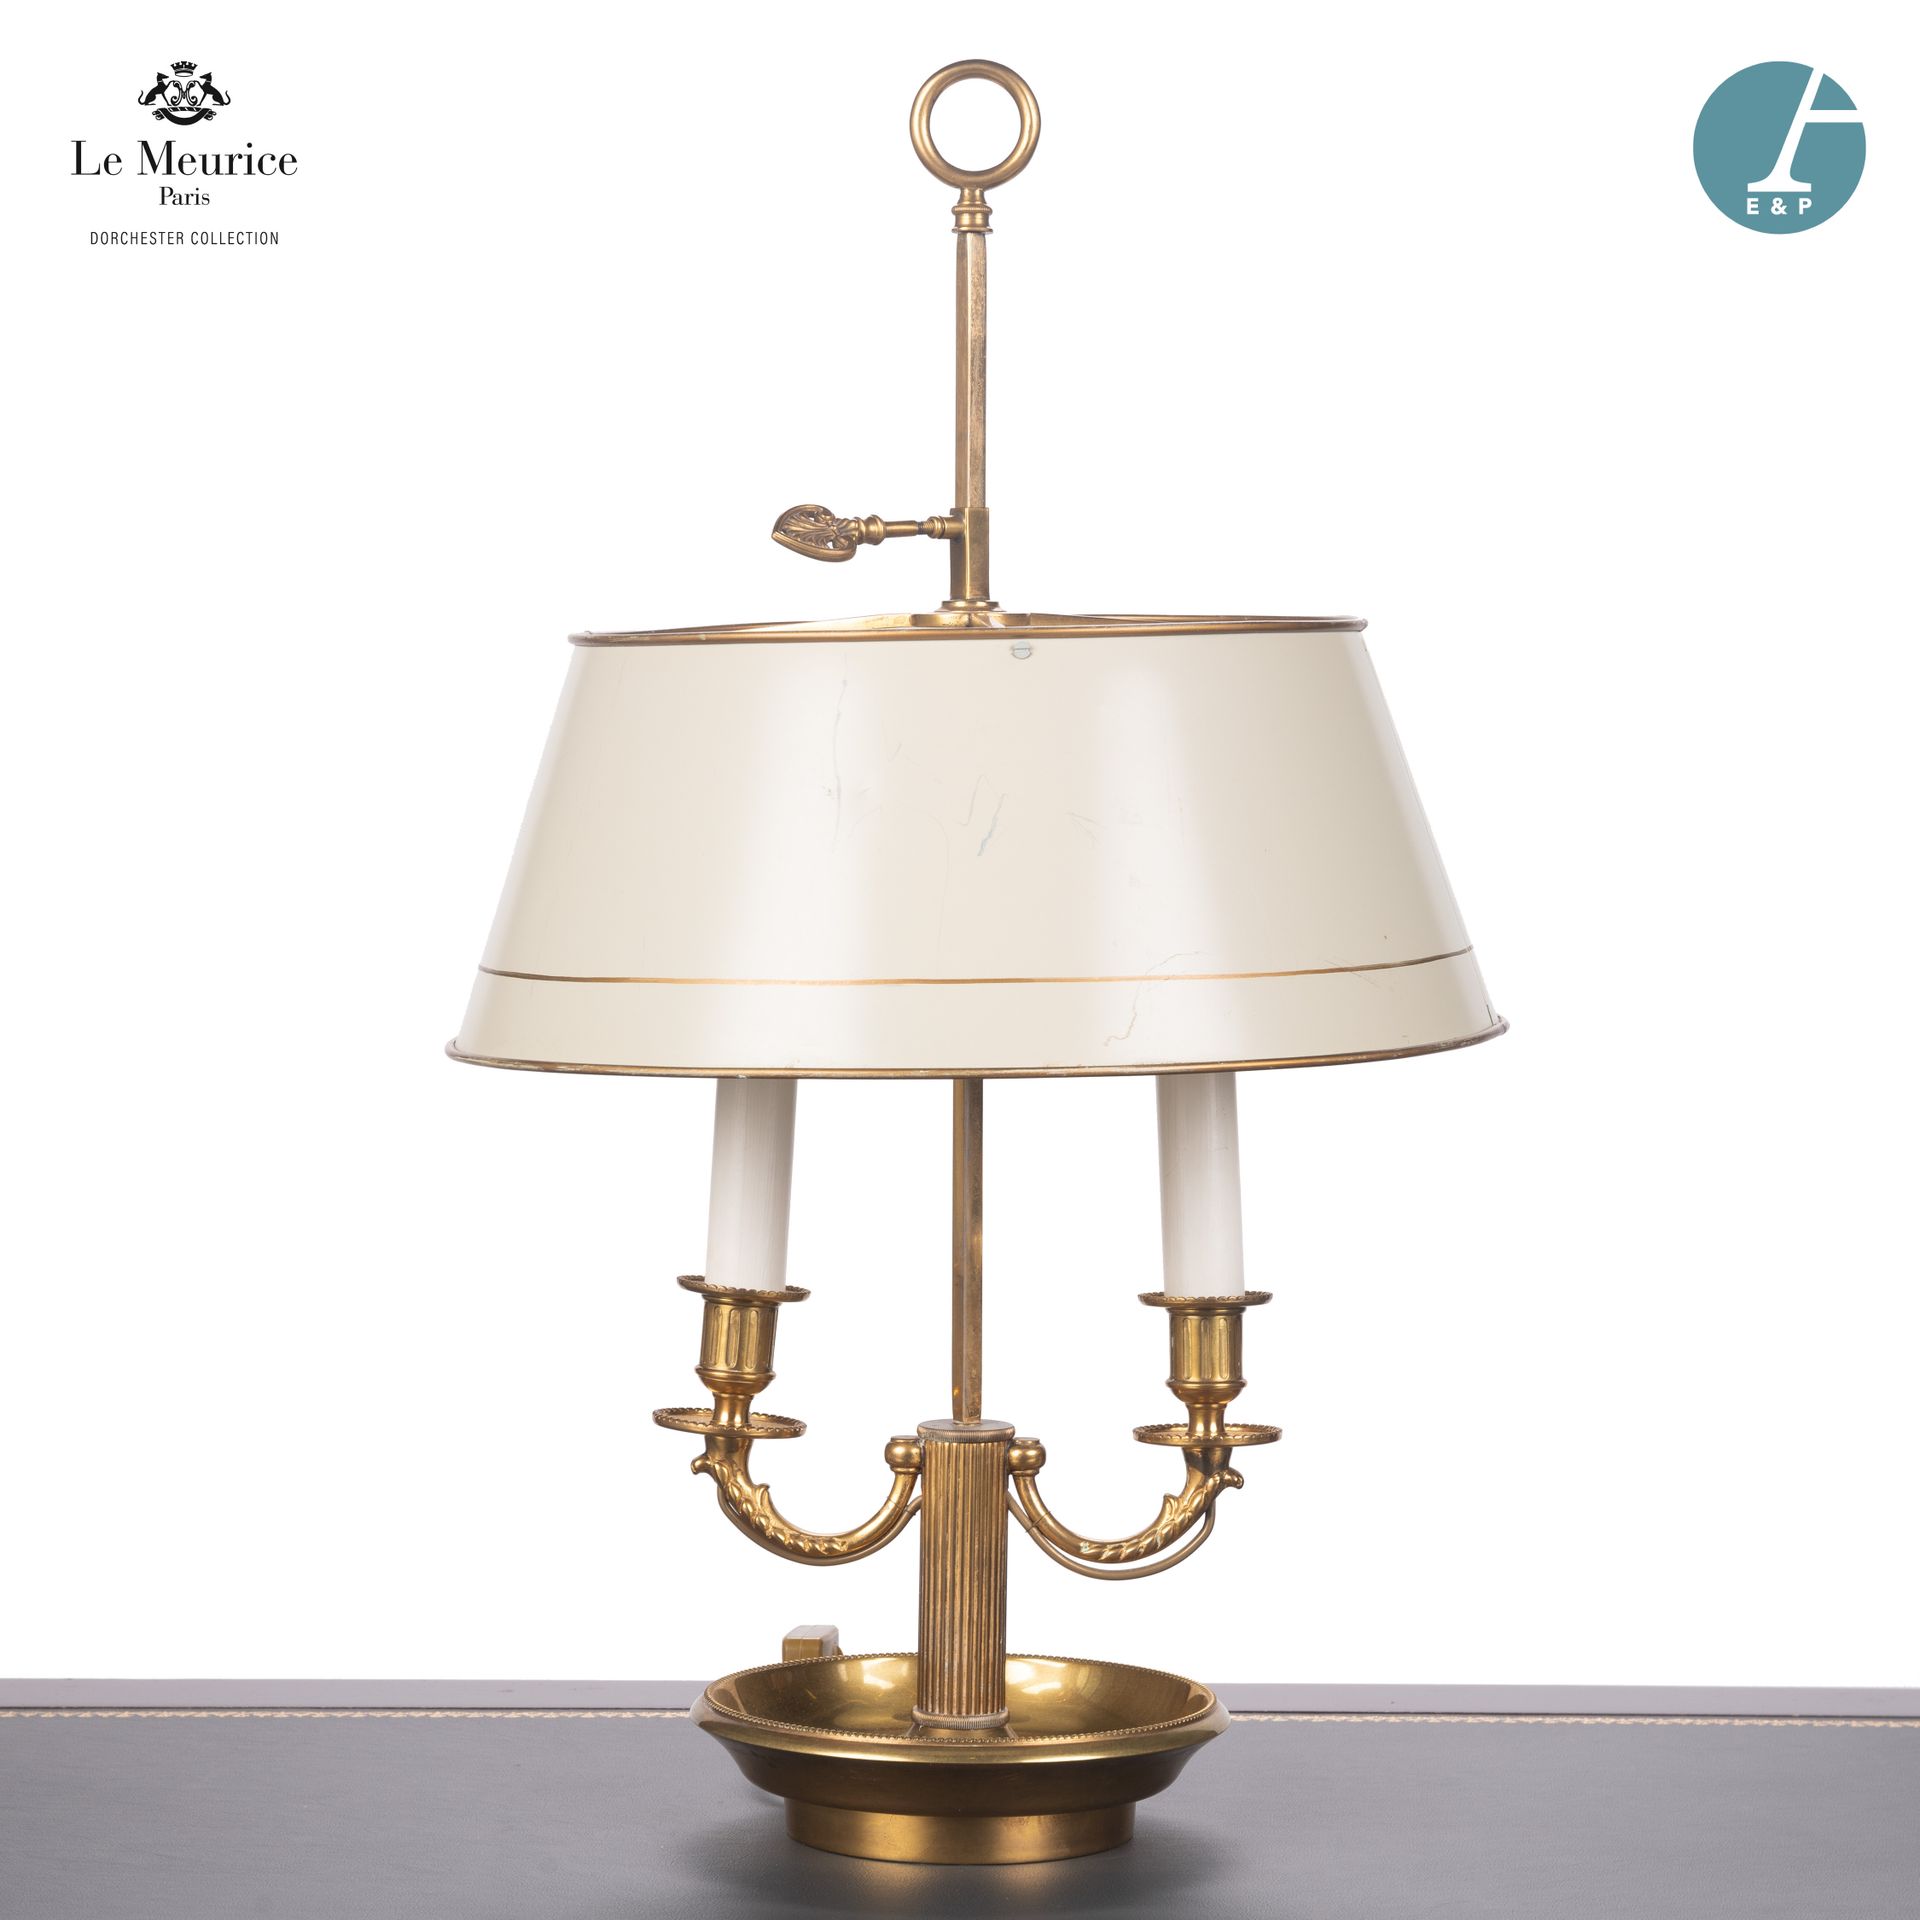 Null From Hôtel Le Meurice.
Gilded metal hot-water bottle lamp with two light ar&hellip;